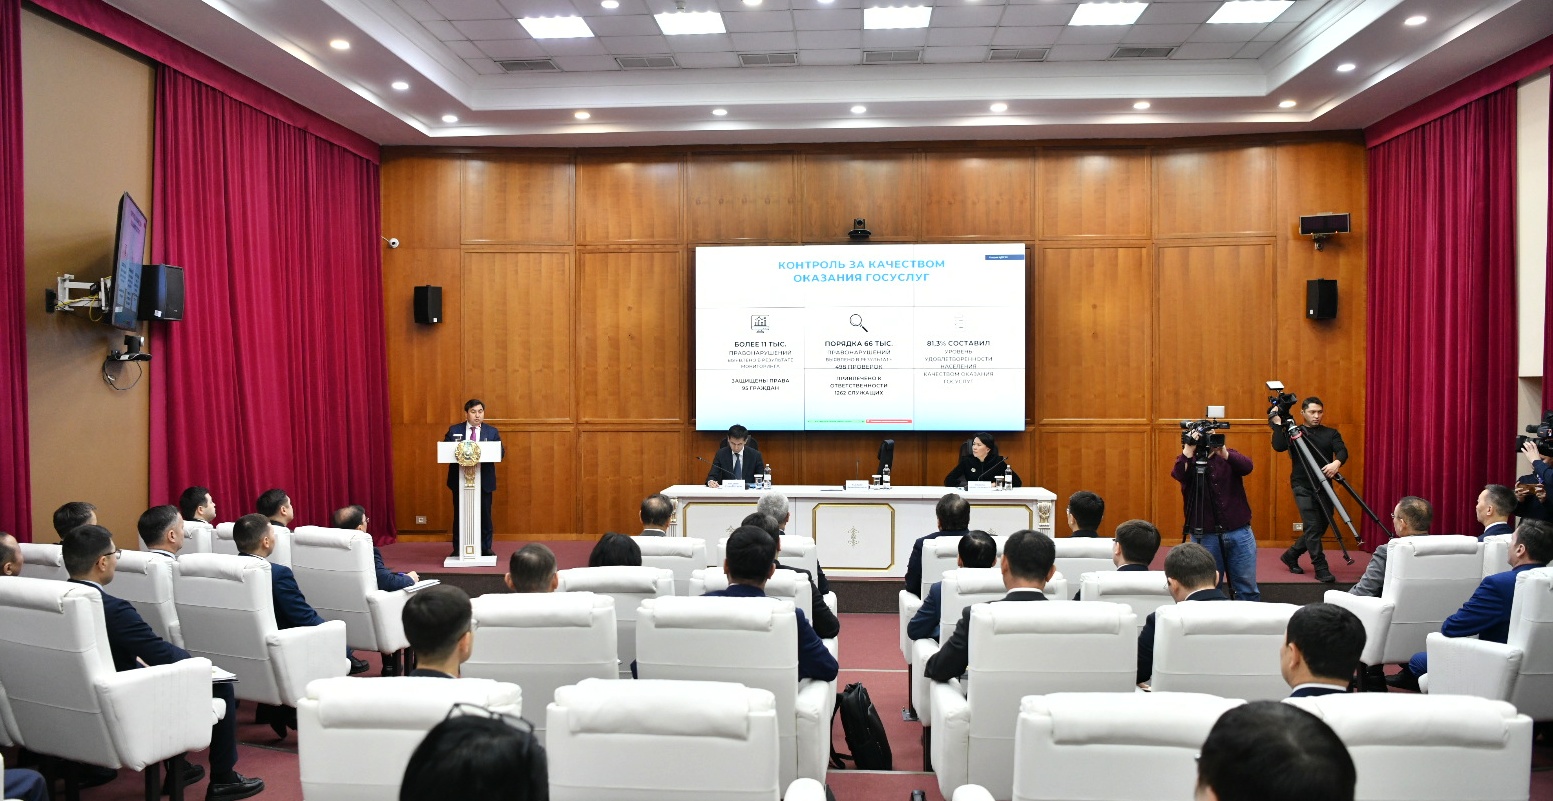 Kazakhstan has established an Institute for Human Resource Management in the field of public service